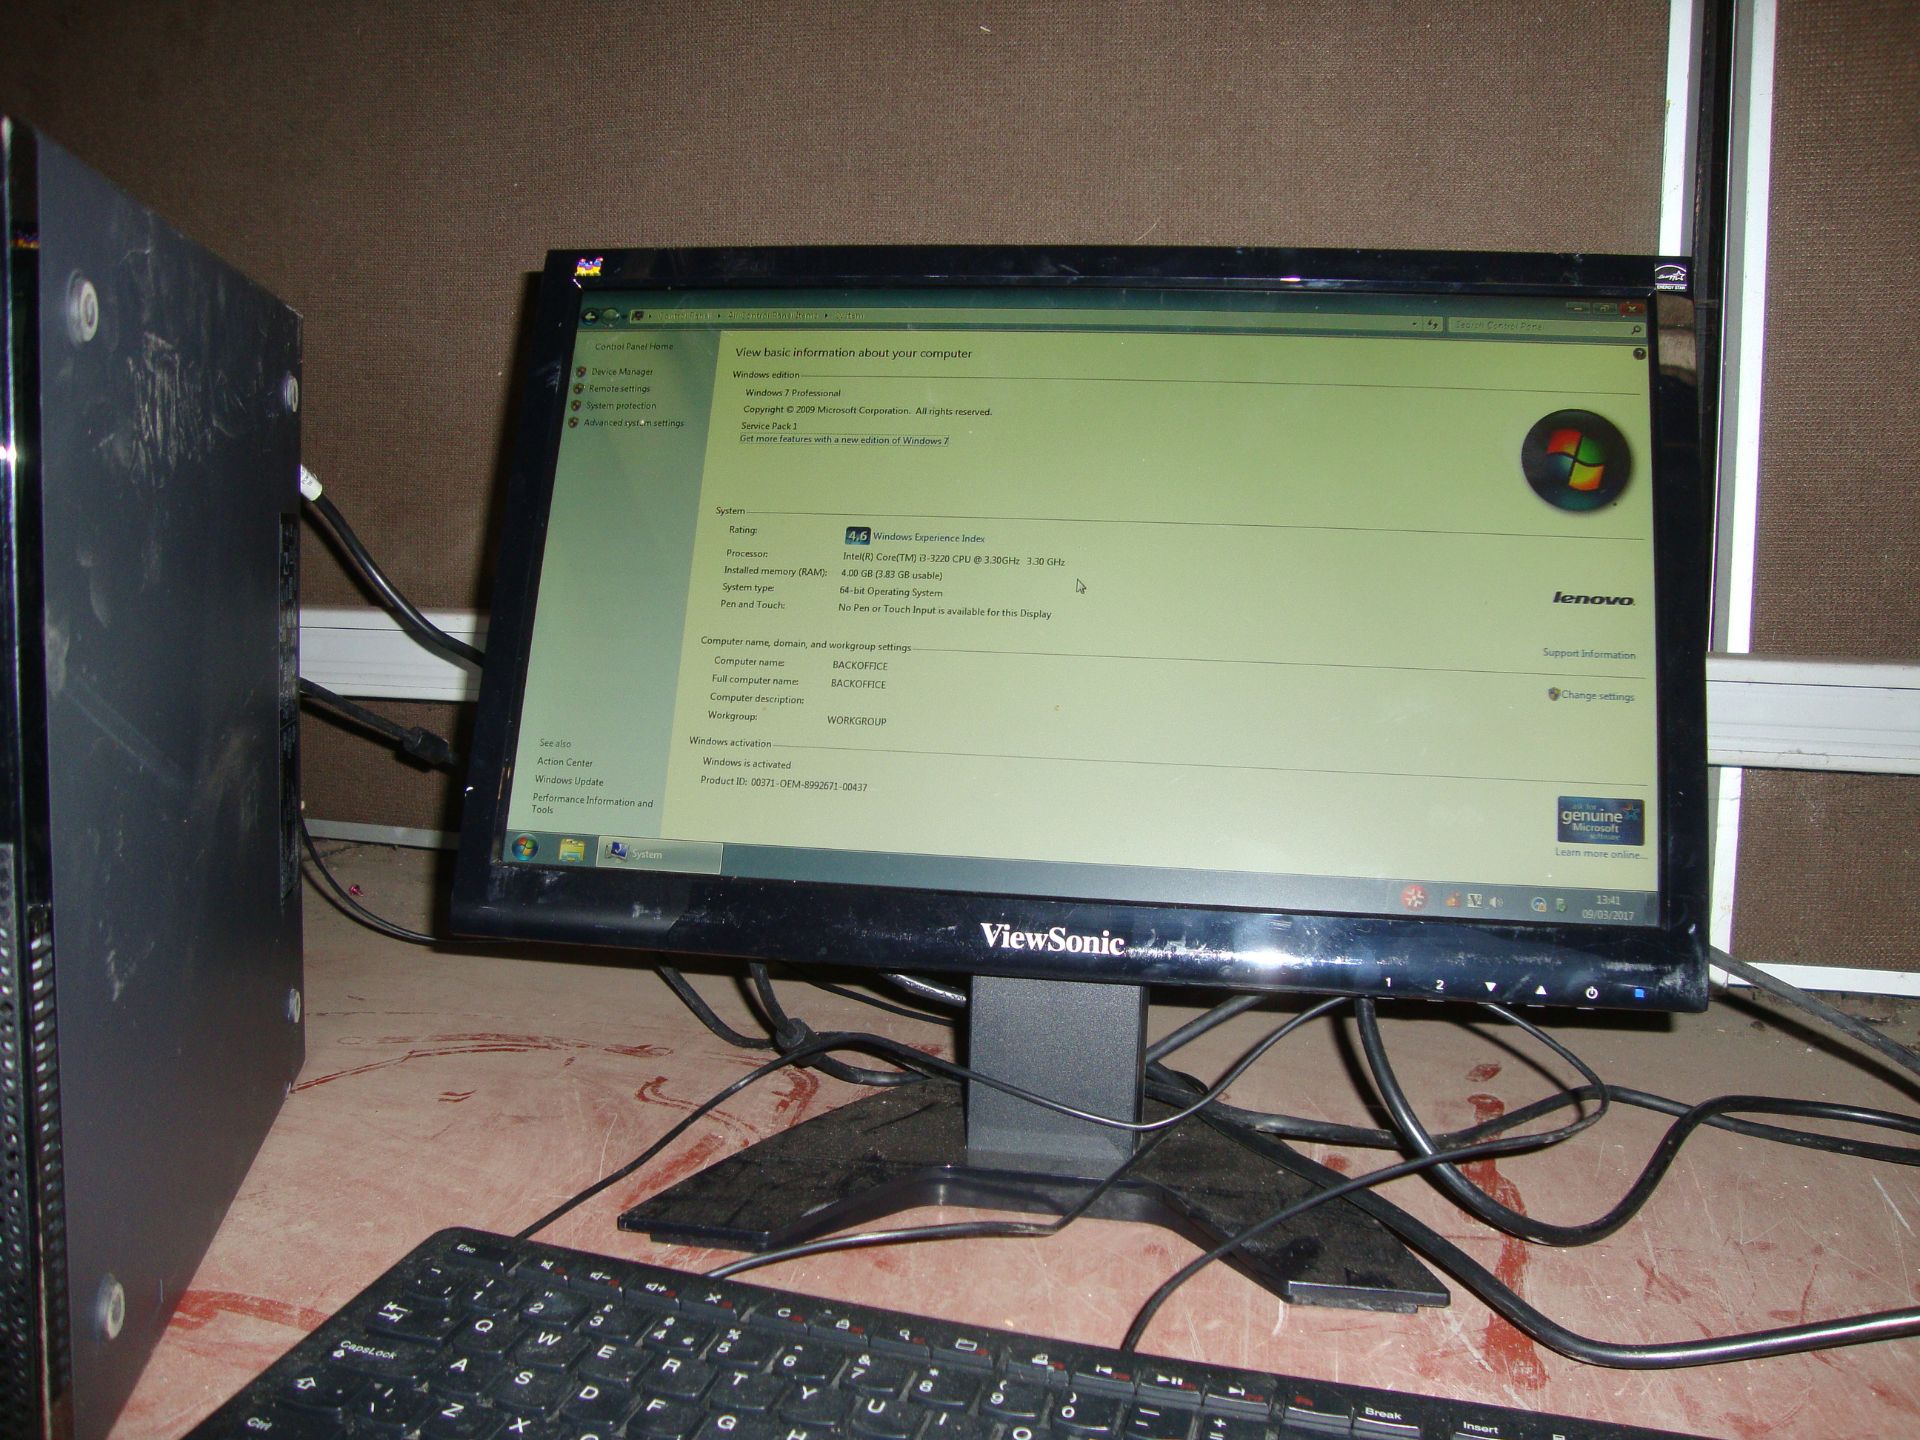 Lenovo desktop PC with Intel Core i3-3220@ 3.3GHz, 4Gb RAM, 500Gb hard drive, keyboard and Viewsonic - Image 3 of 4